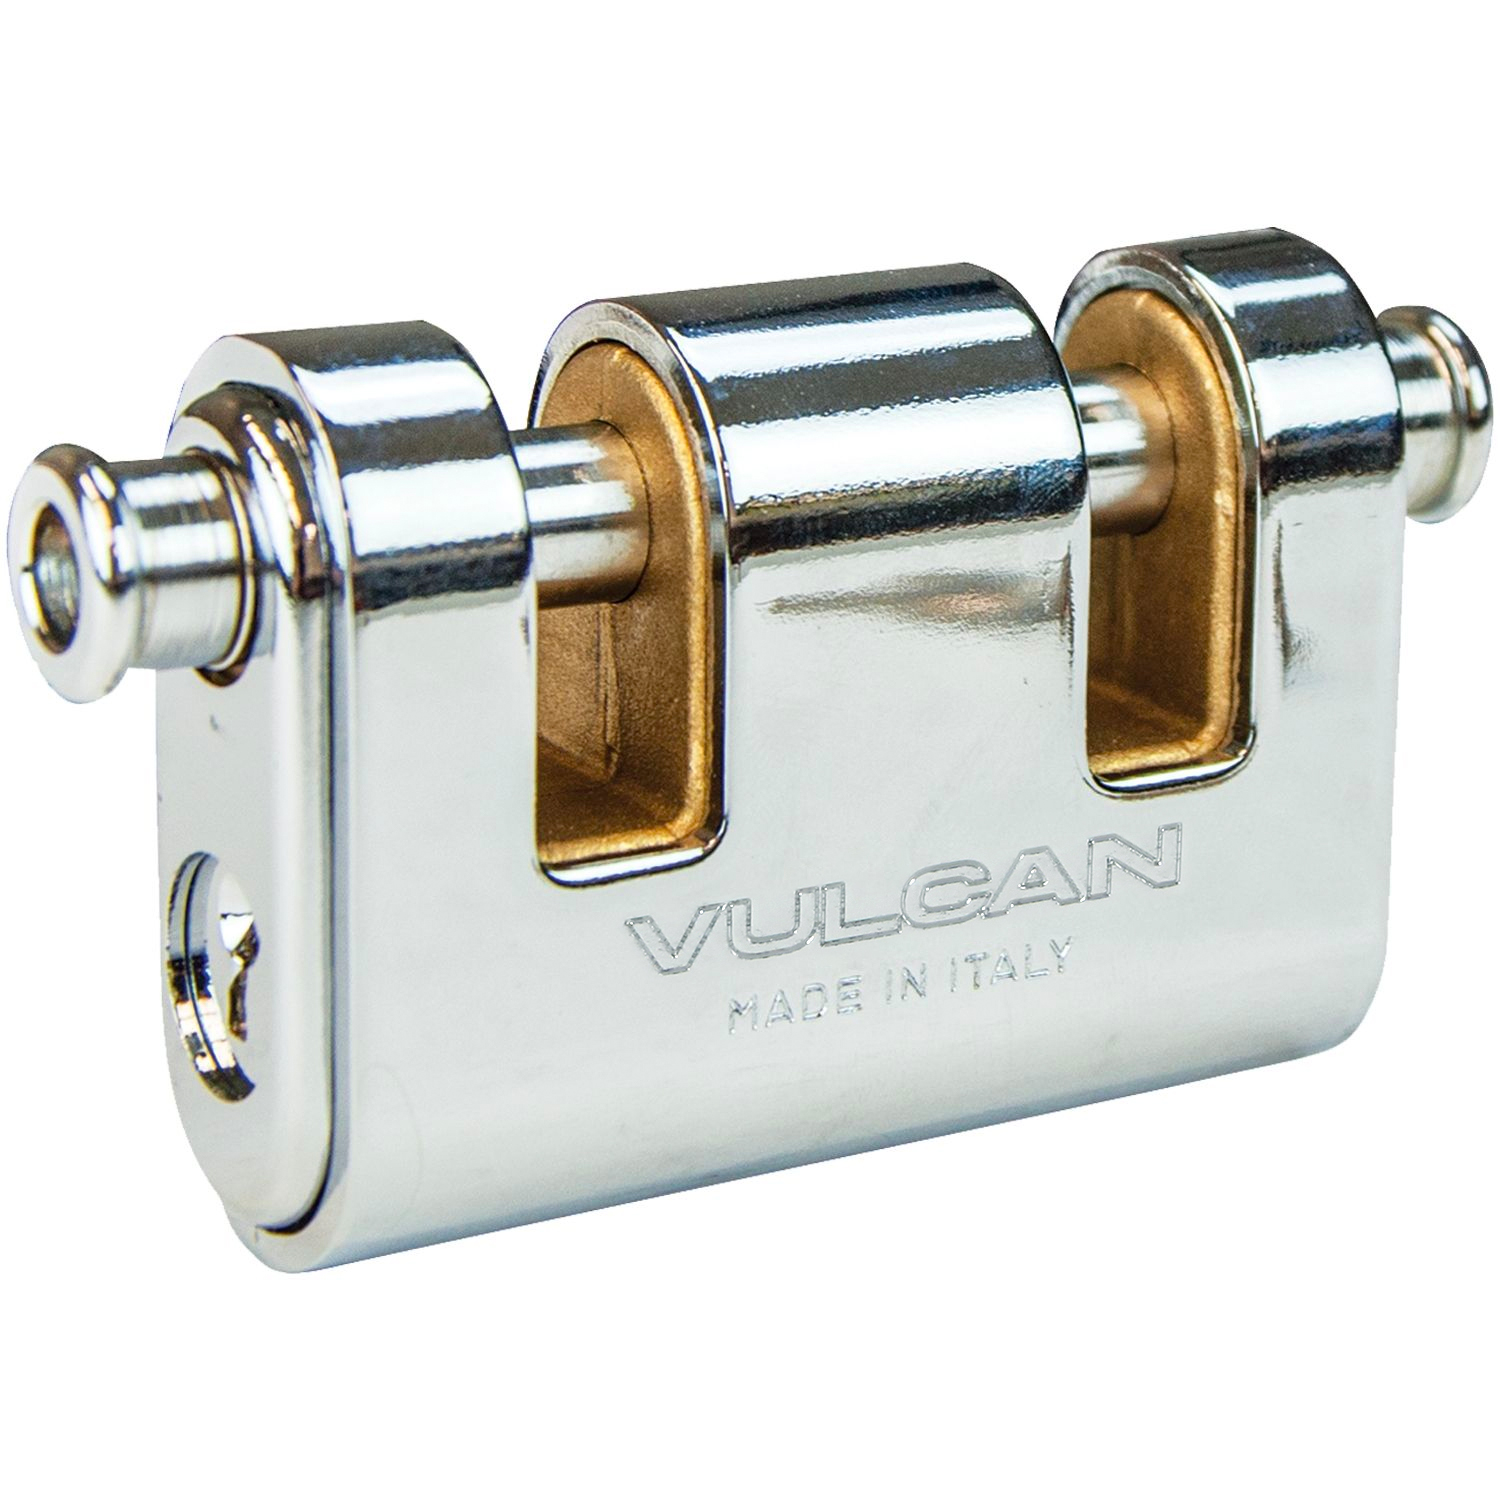 Vulcan Security Chain - Premium Case-Hardened - 5/16 inch x 3 Foot Chain Cannot Be Cut with Bolt Cutters or Hand Tools